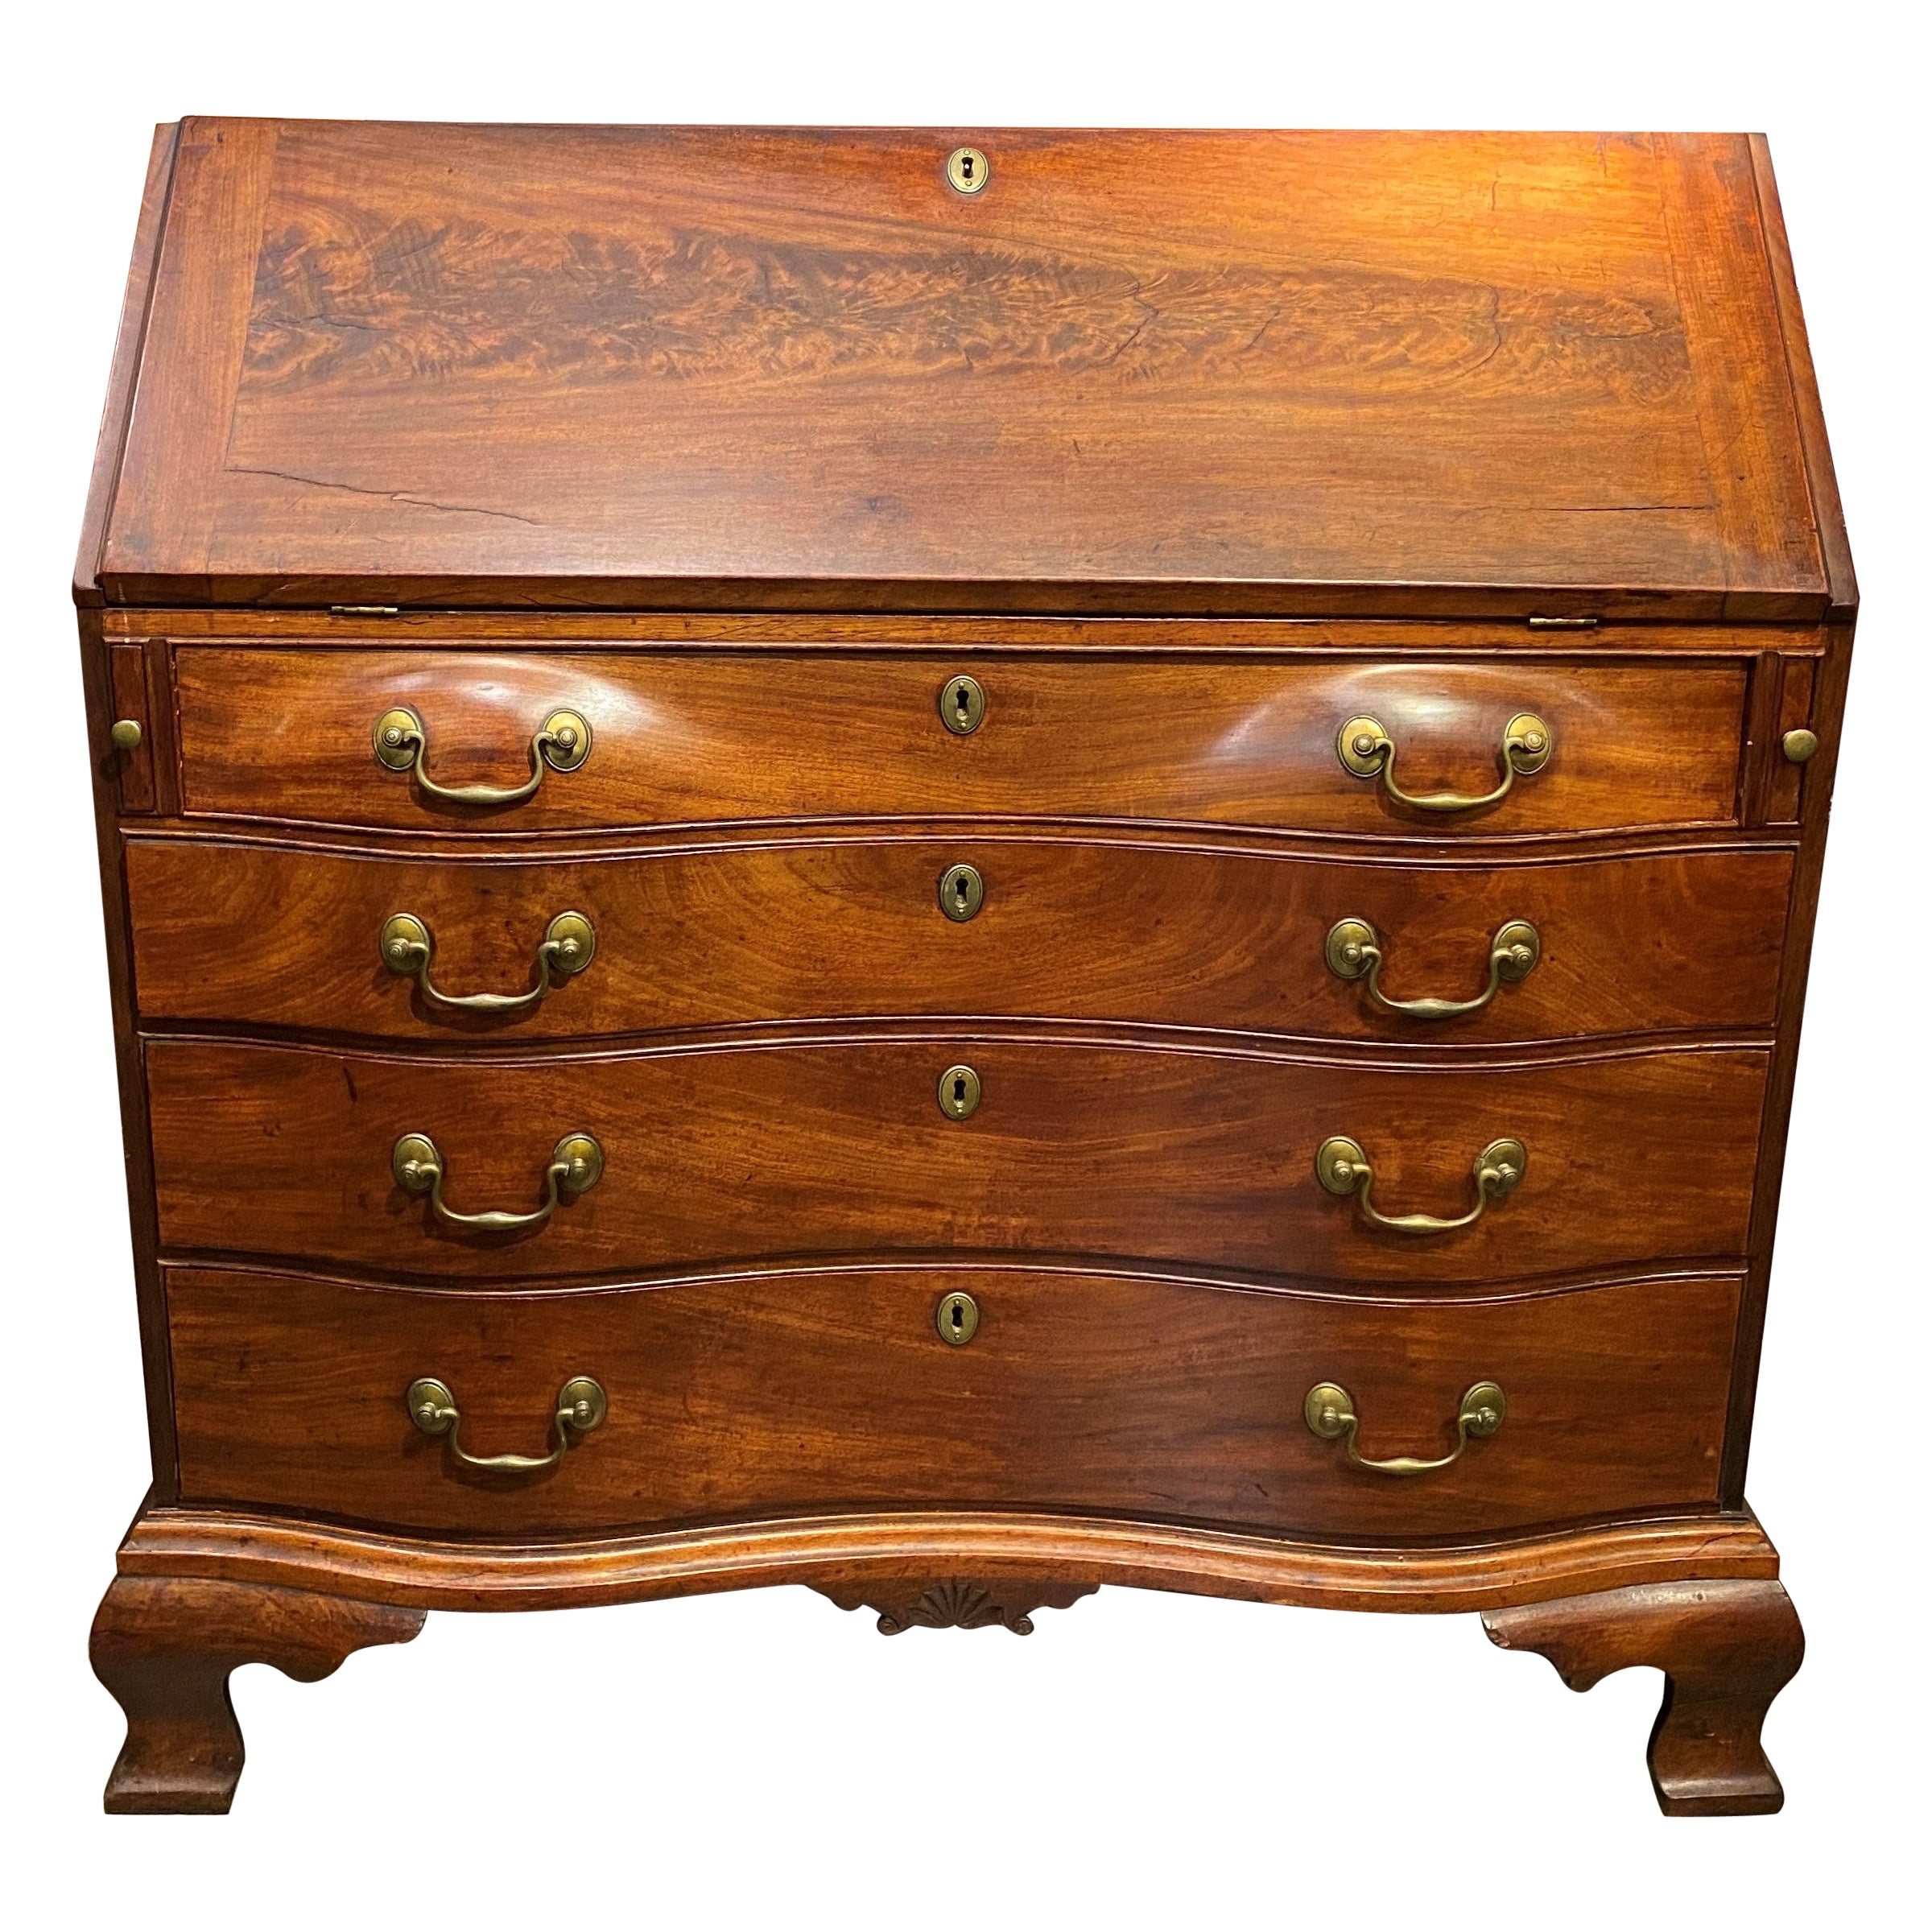 18th Century Massachusetts Mahogany Chippendale Desk with Shell Drop & Ogee Feet